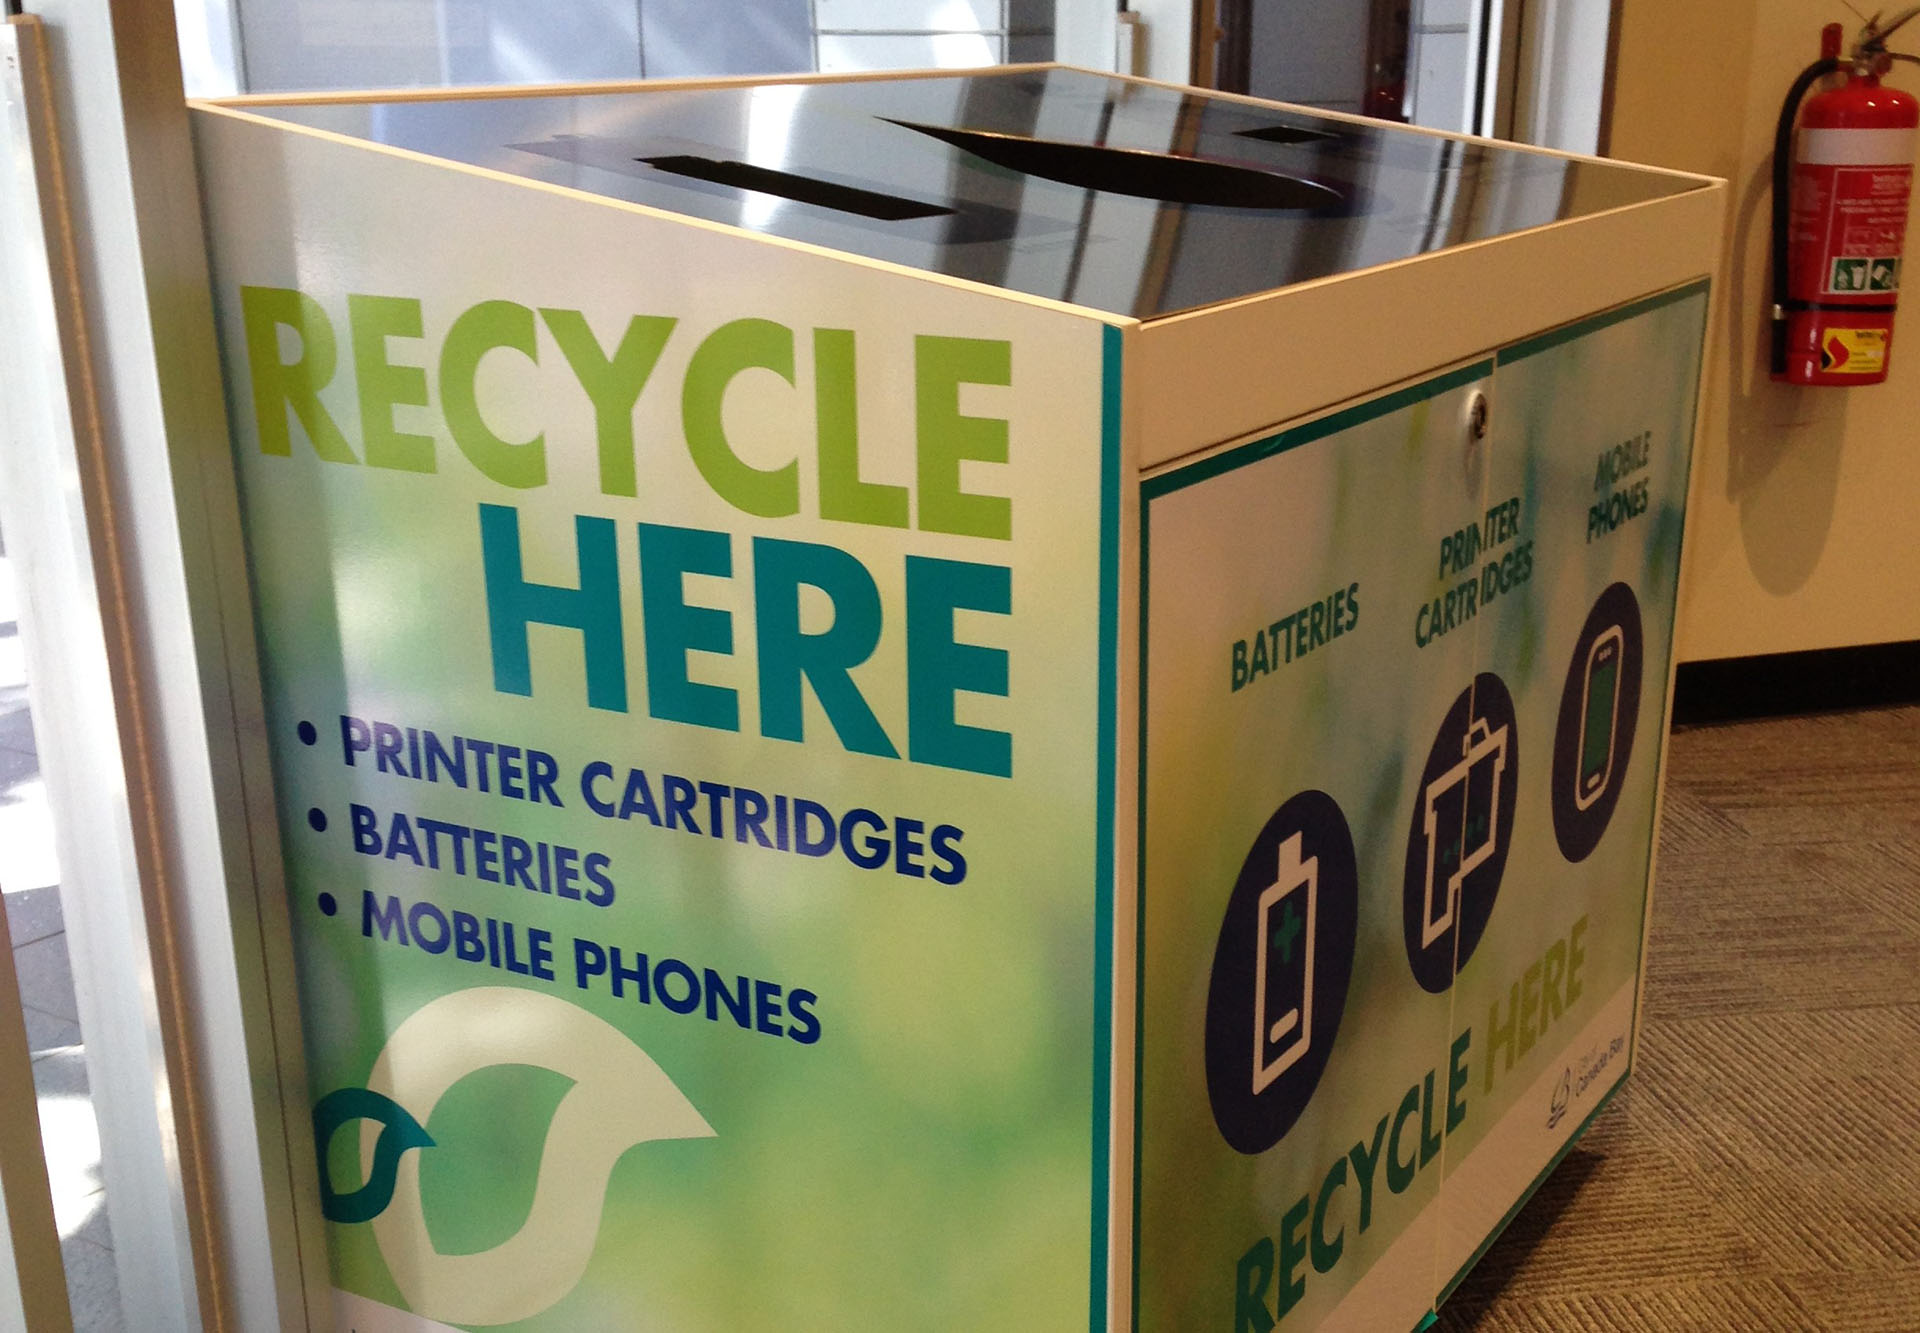 Image of a recycling station